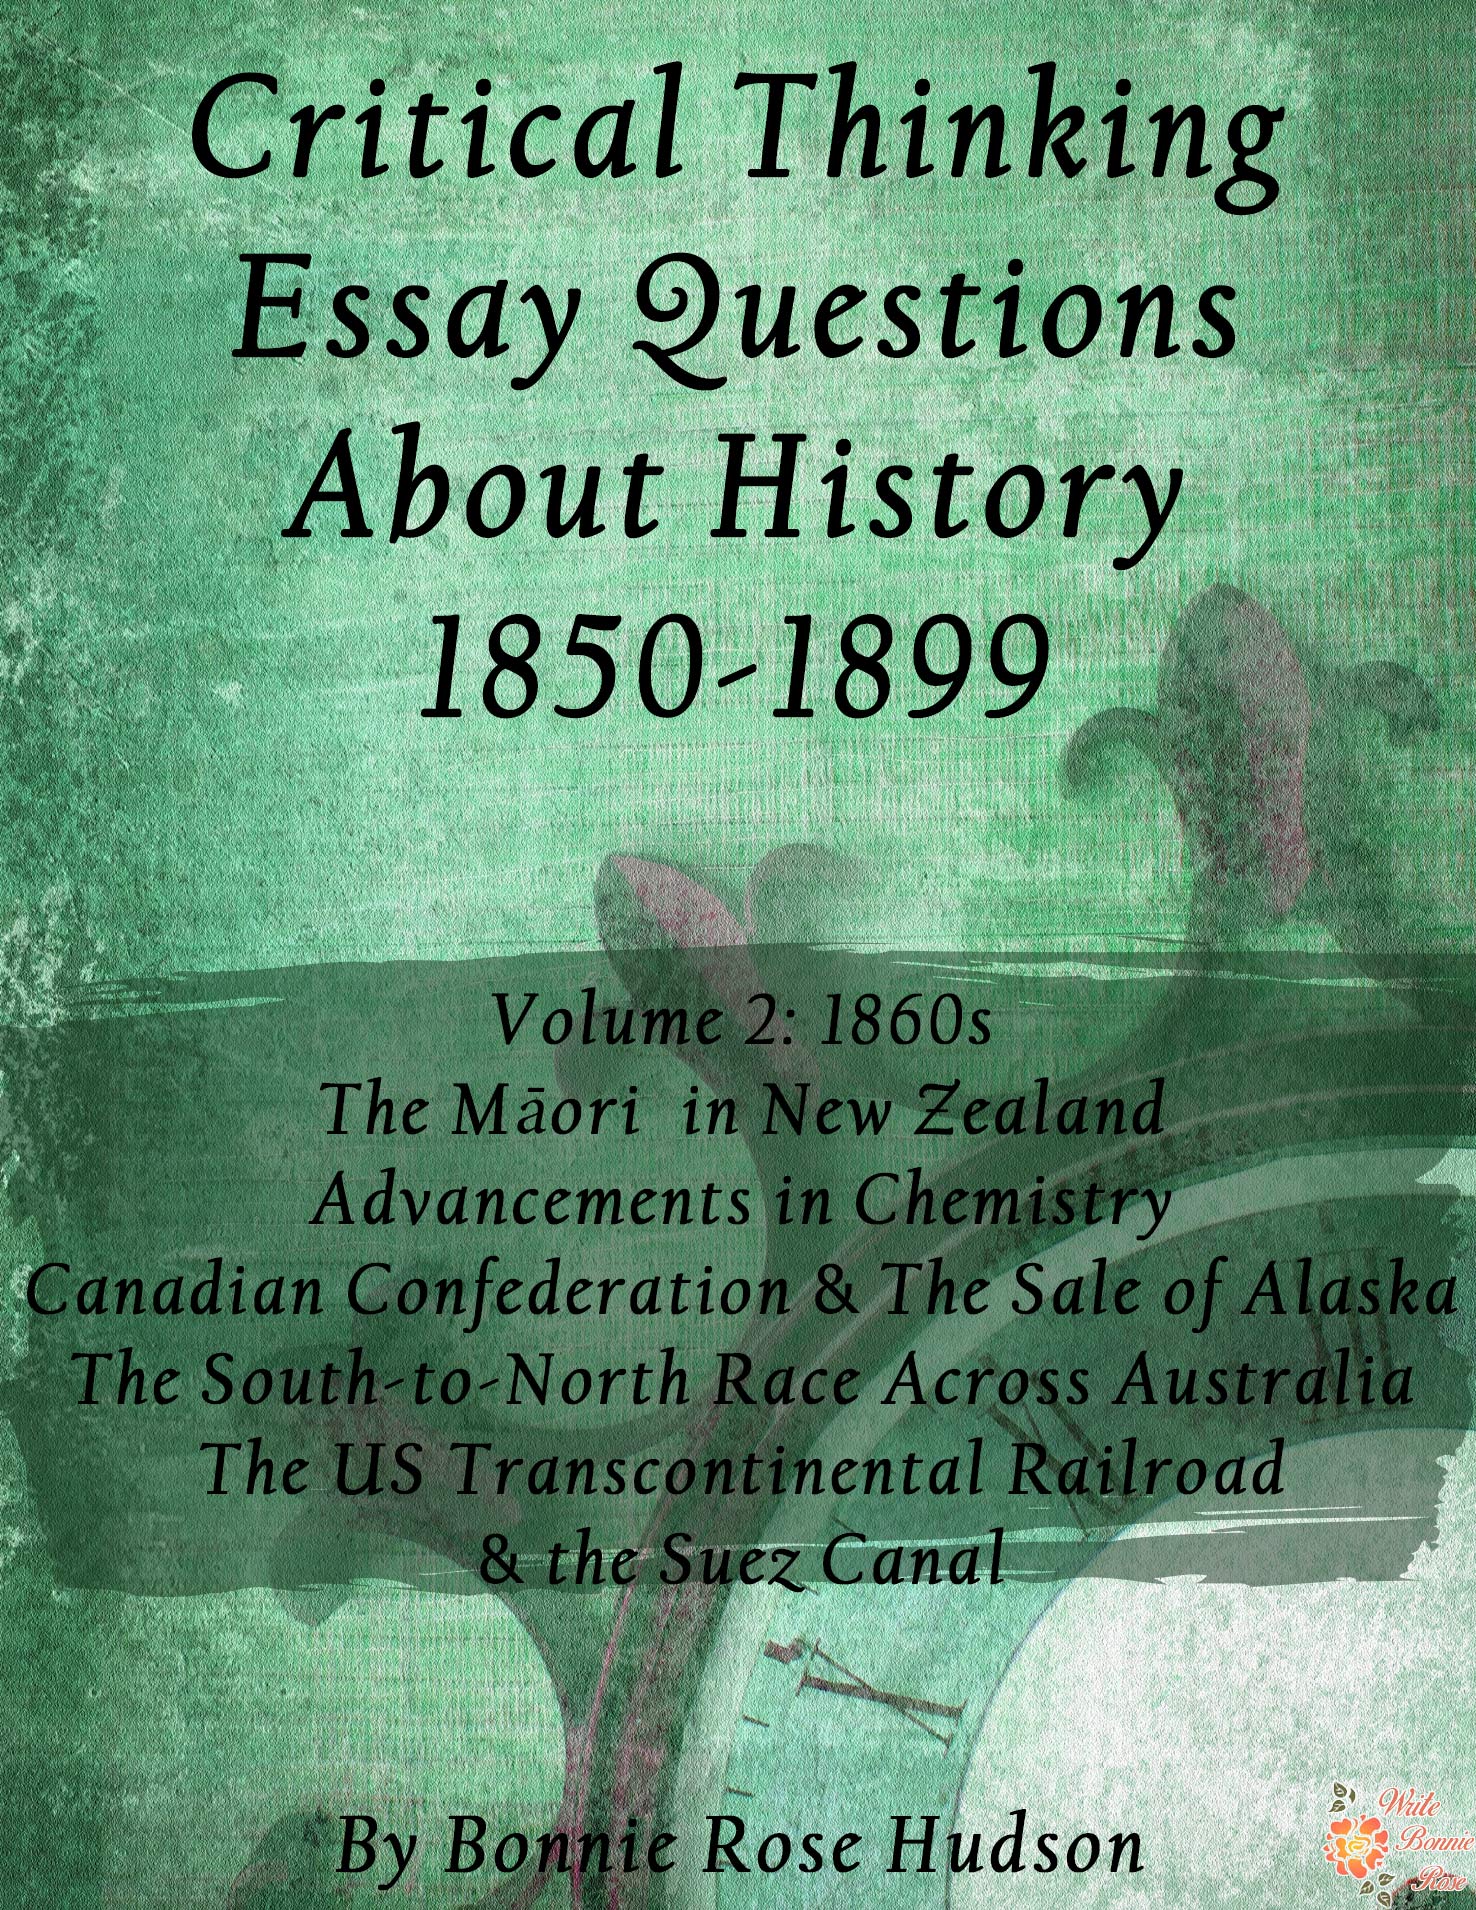 FREE Critical Thinking Essay Questions About History 1850-1899, Volume 2